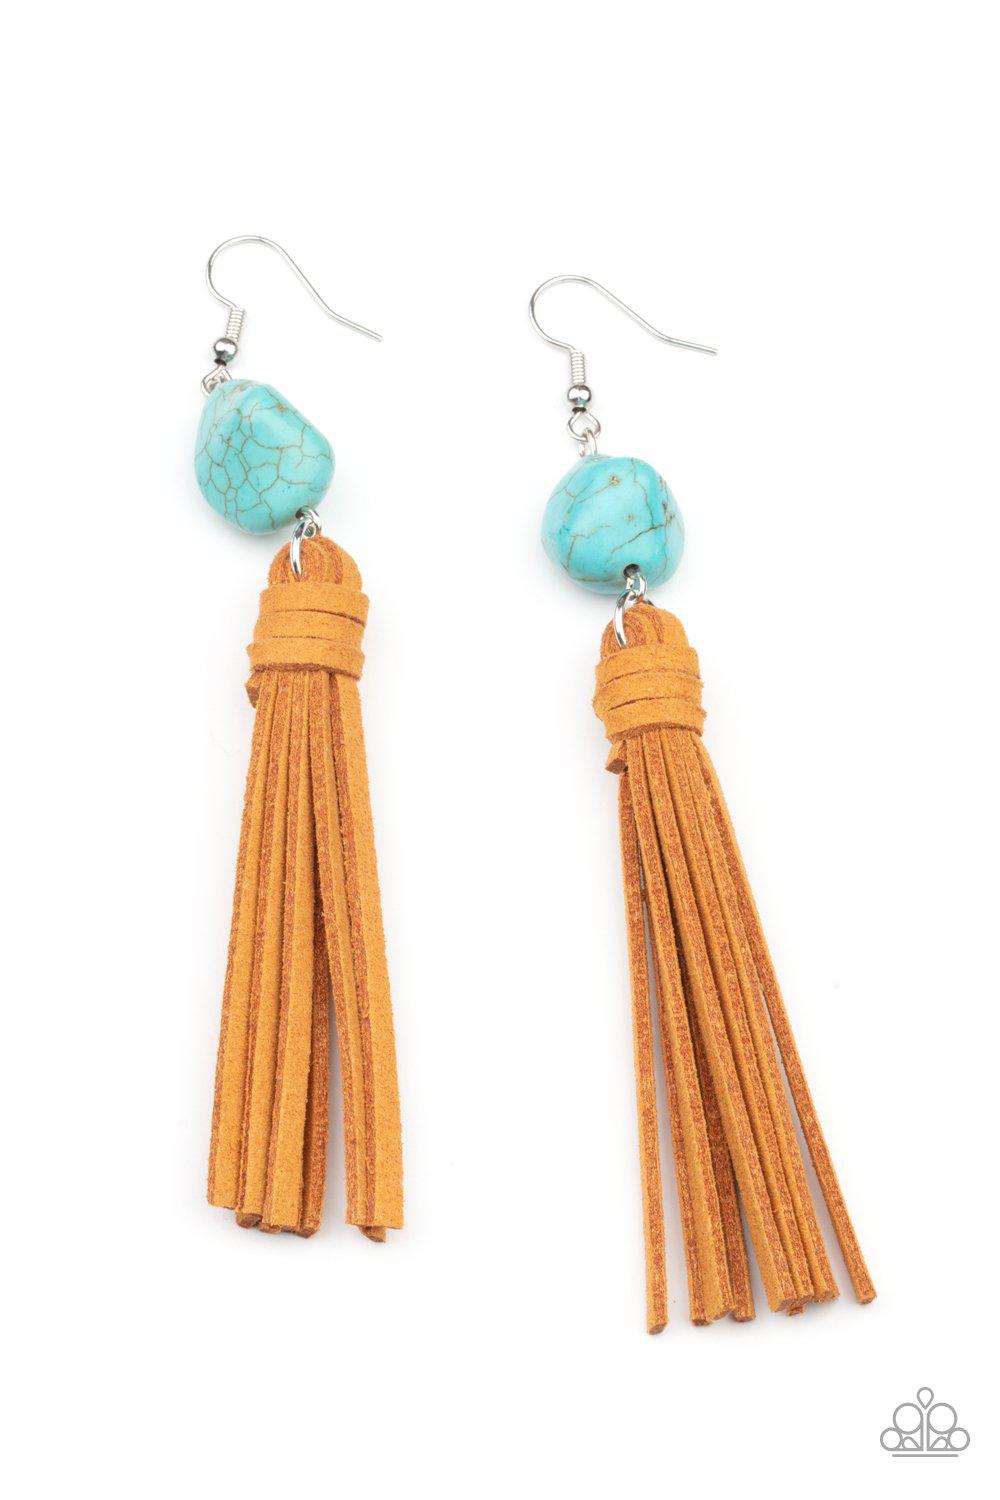 All-Natural Allure Turquoise Blue Stone and Suede Tassel Earrings - Paparazzi Accessories- lightbox - CarasShop.com - $5 Jewelry by Cara Jewels